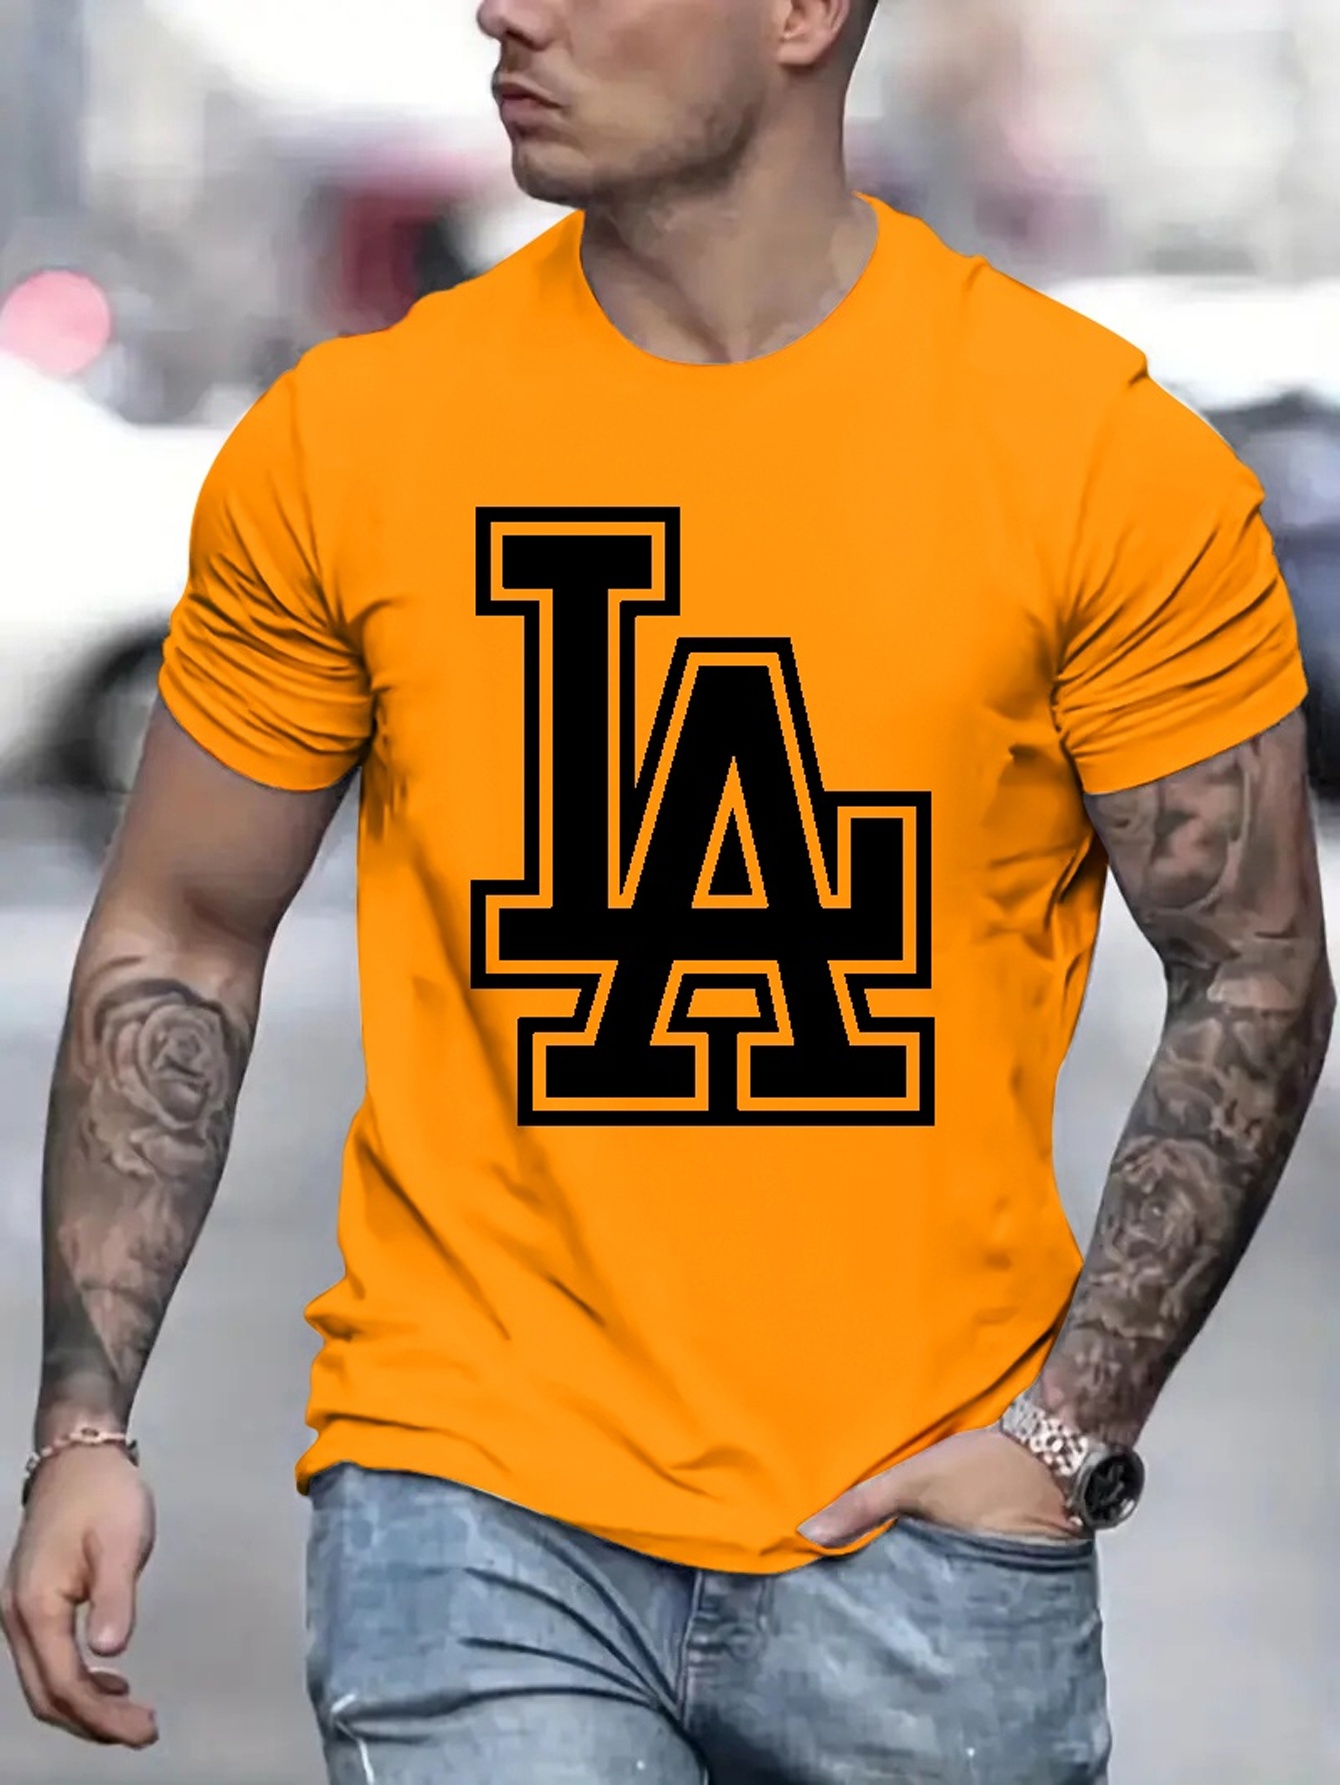 CAMISETA MUJER LOS ANGELES DODGERS A RAYAS